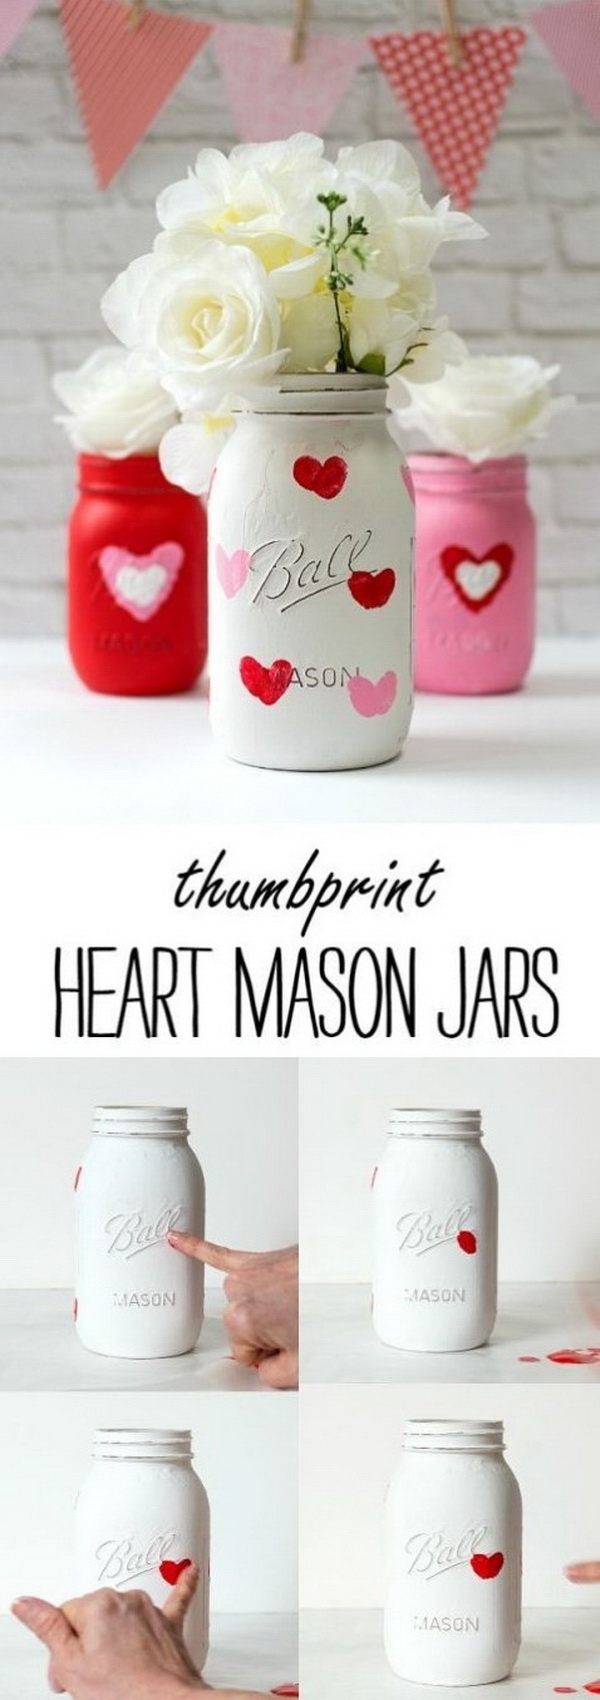 Mason Jar Craft Ideas for Valentines Day - Painted Distressed Mason Jars with Thumbprint Hearts. 